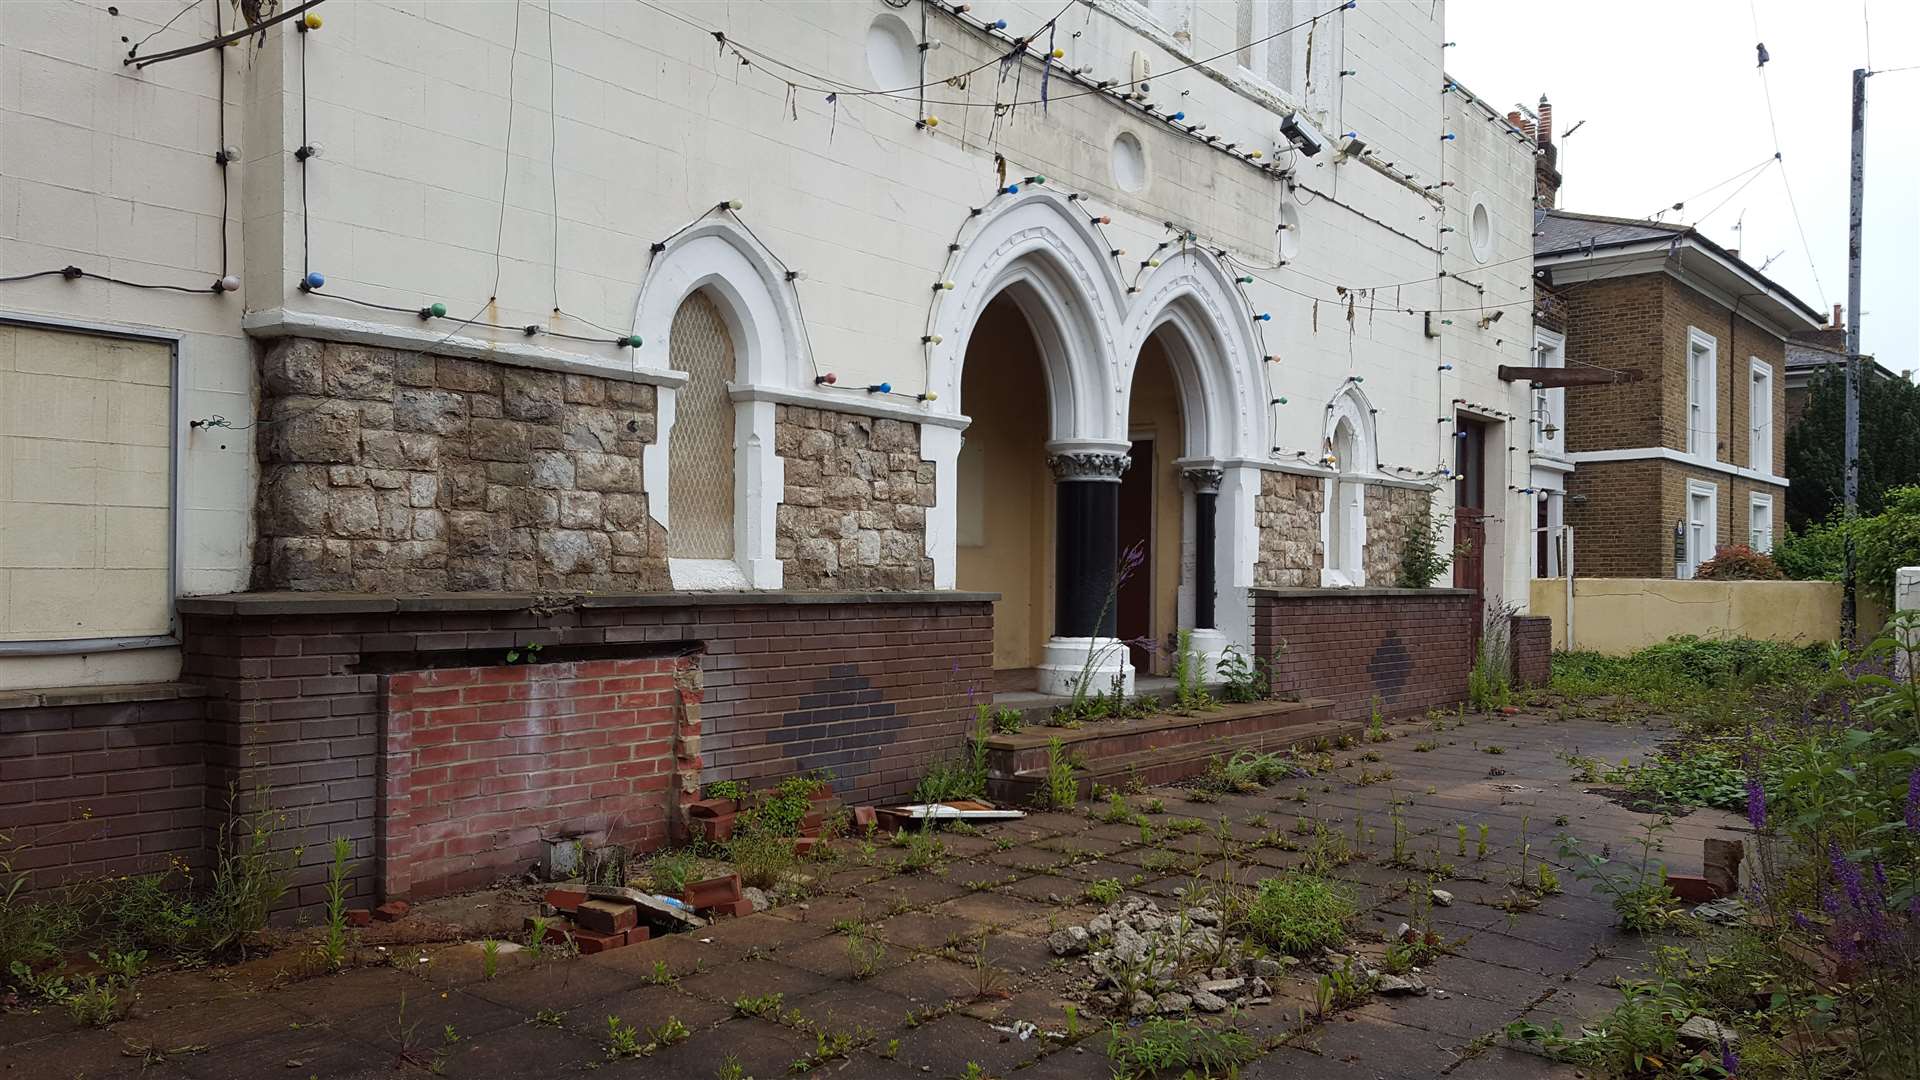 The former Gurdwara temple has been subject to vandalism in recent years.